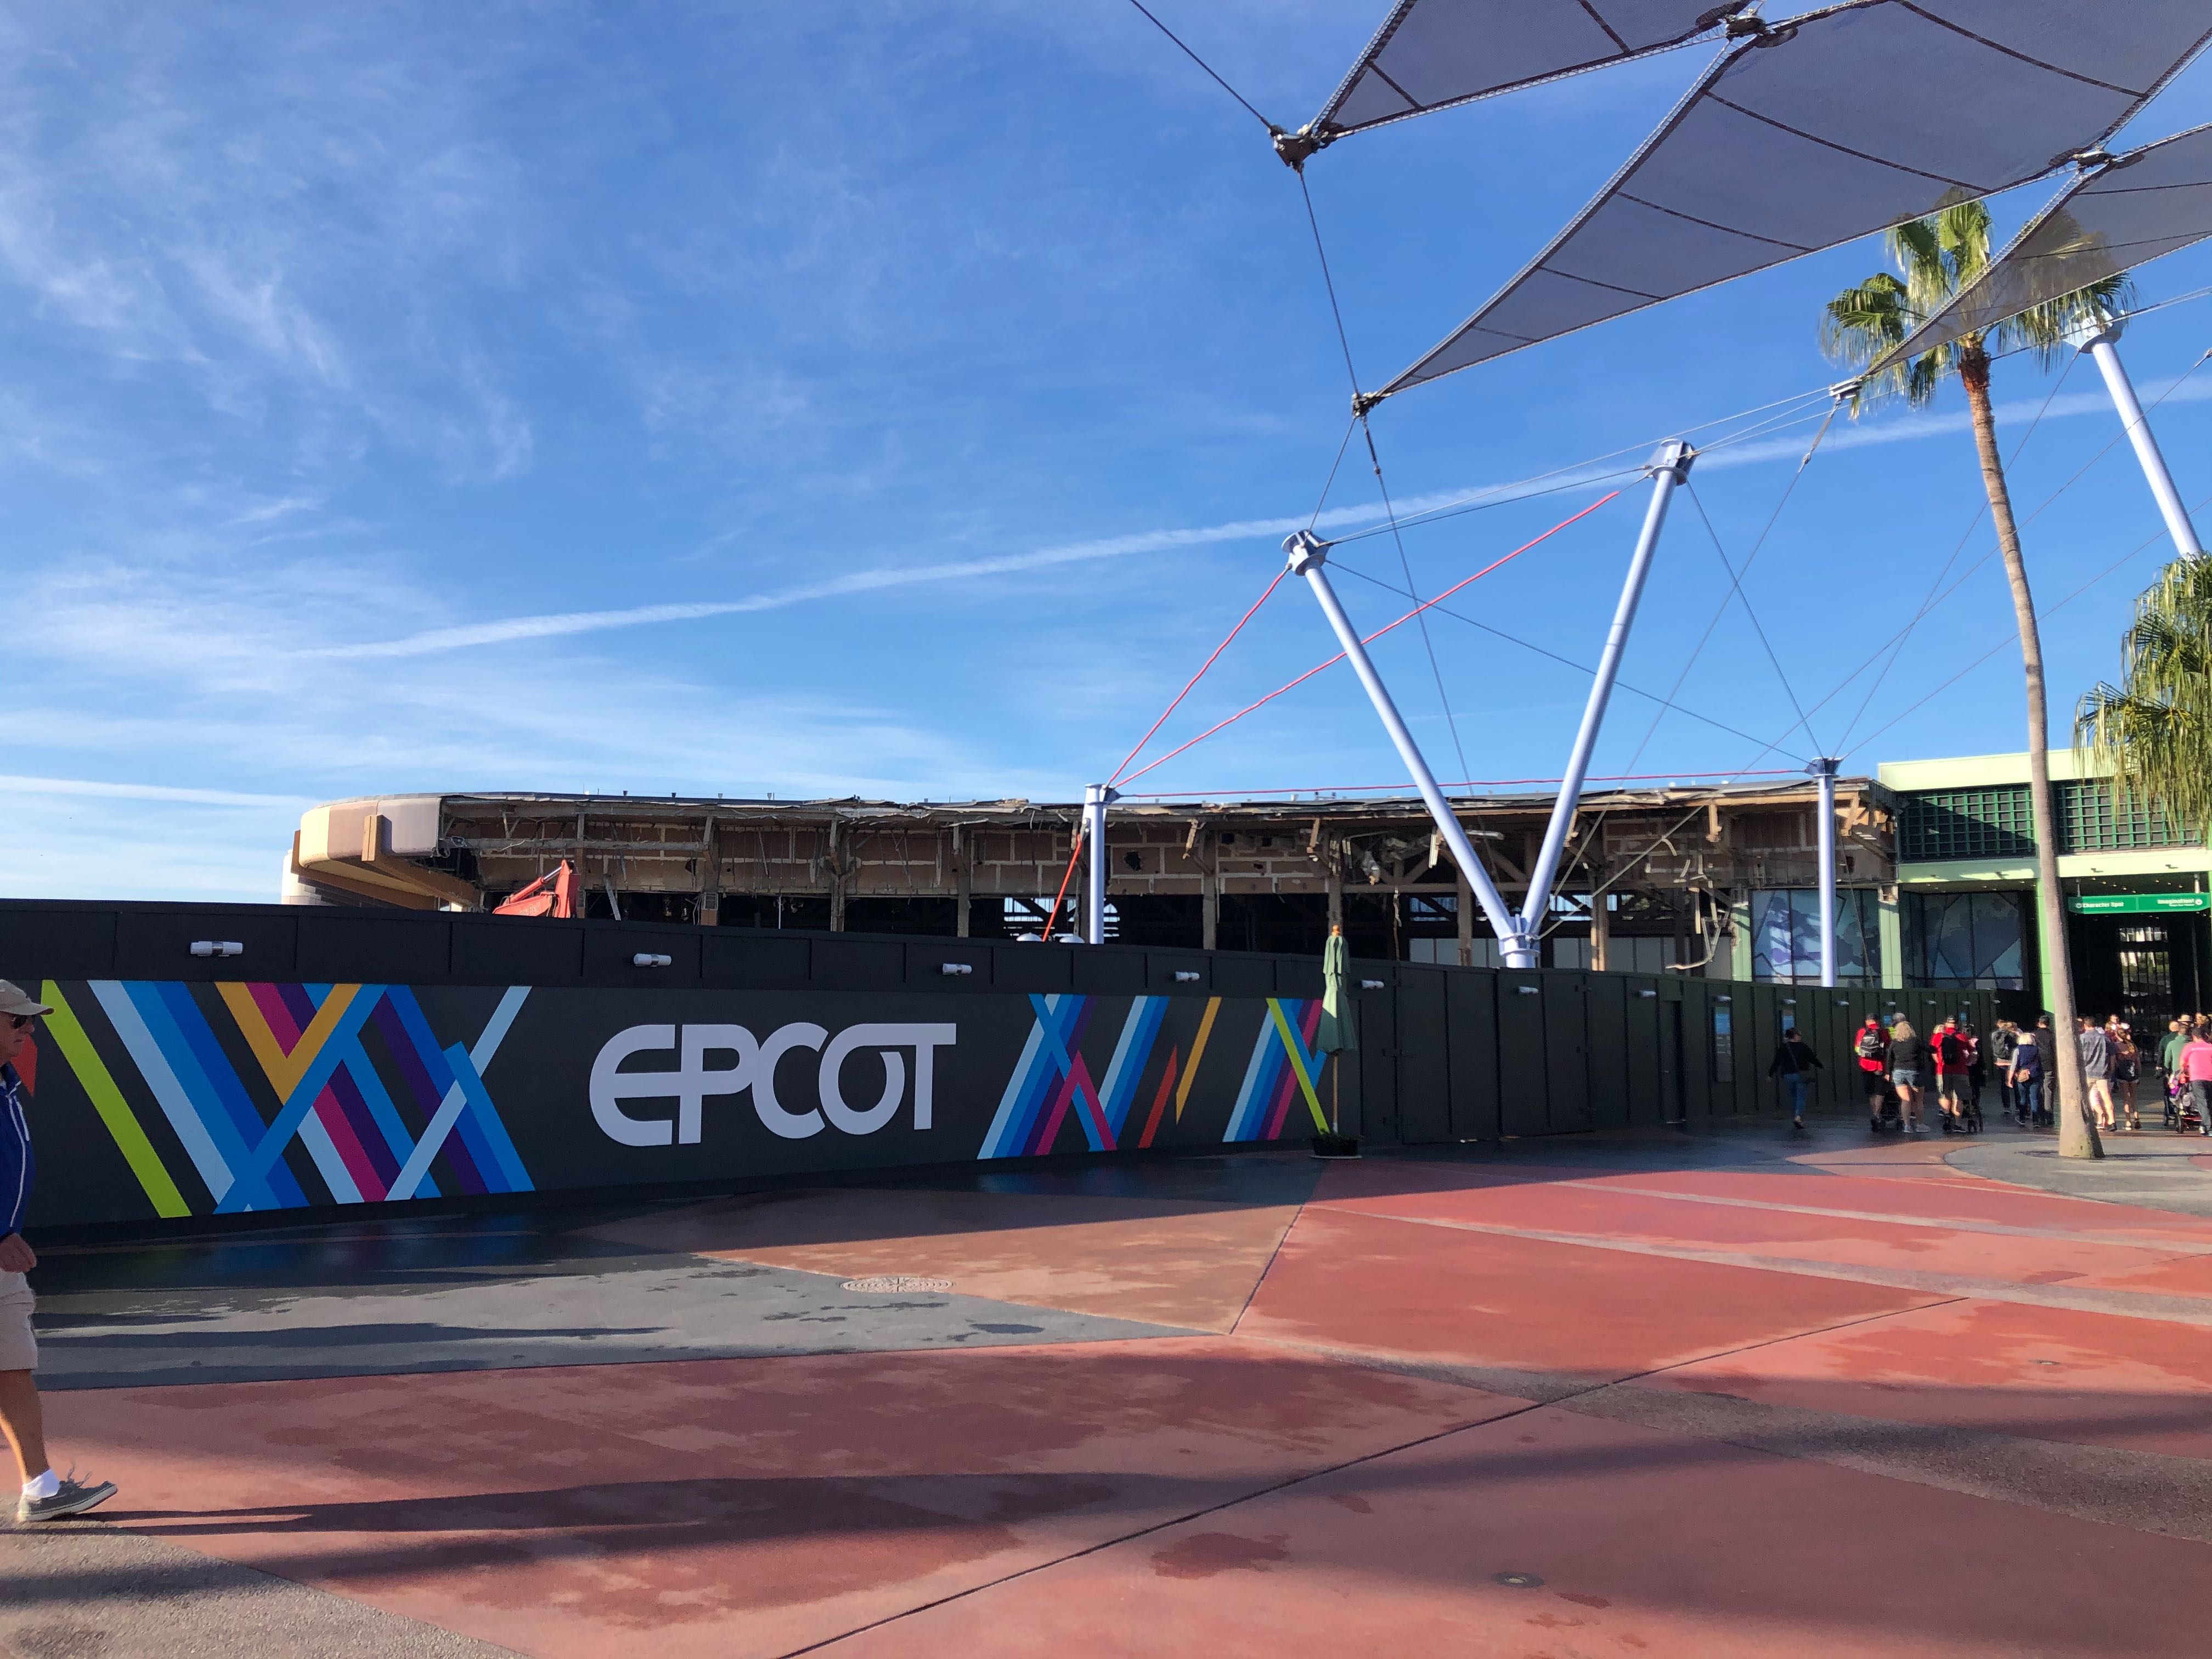 PHOTOS: Innoventions West Demolition Expands Across Building Facade in